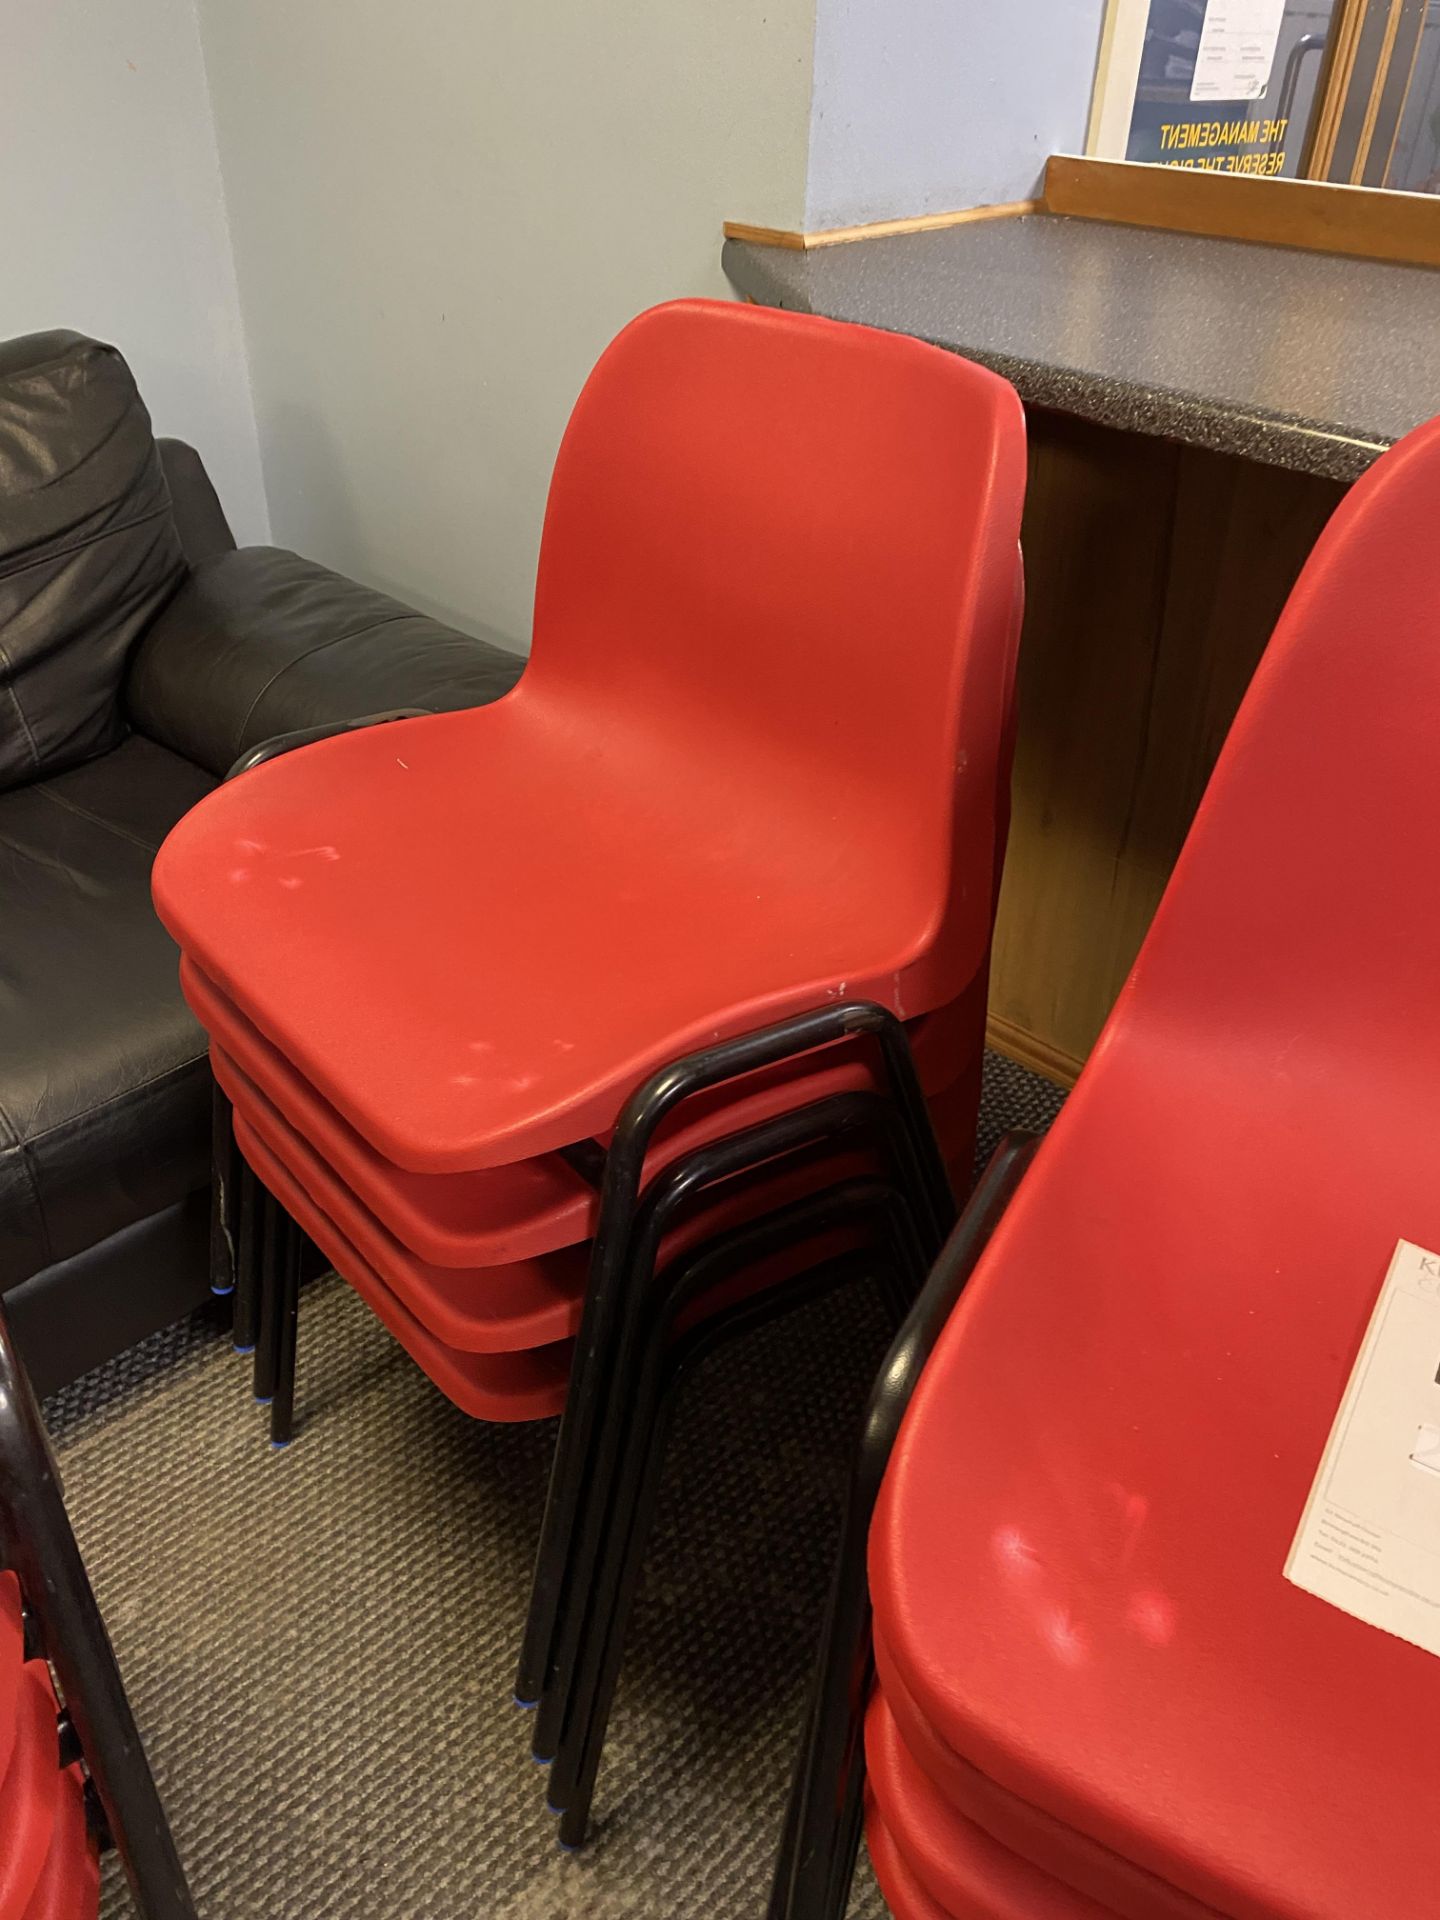 13x Red Plastic Chairs - Image 3 of 5